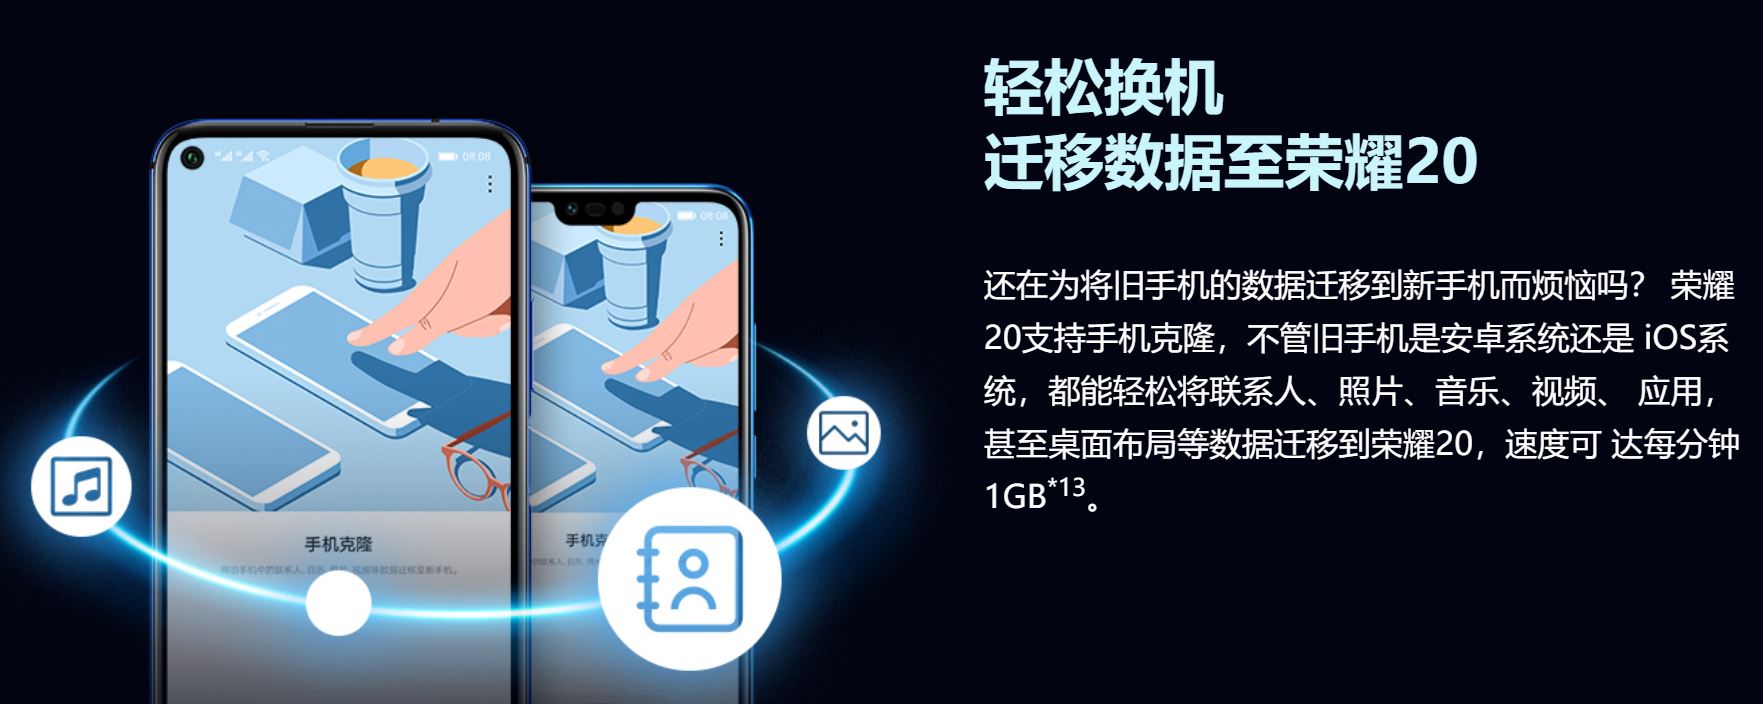 langify_image_container - OUMIBUY•欧米商城